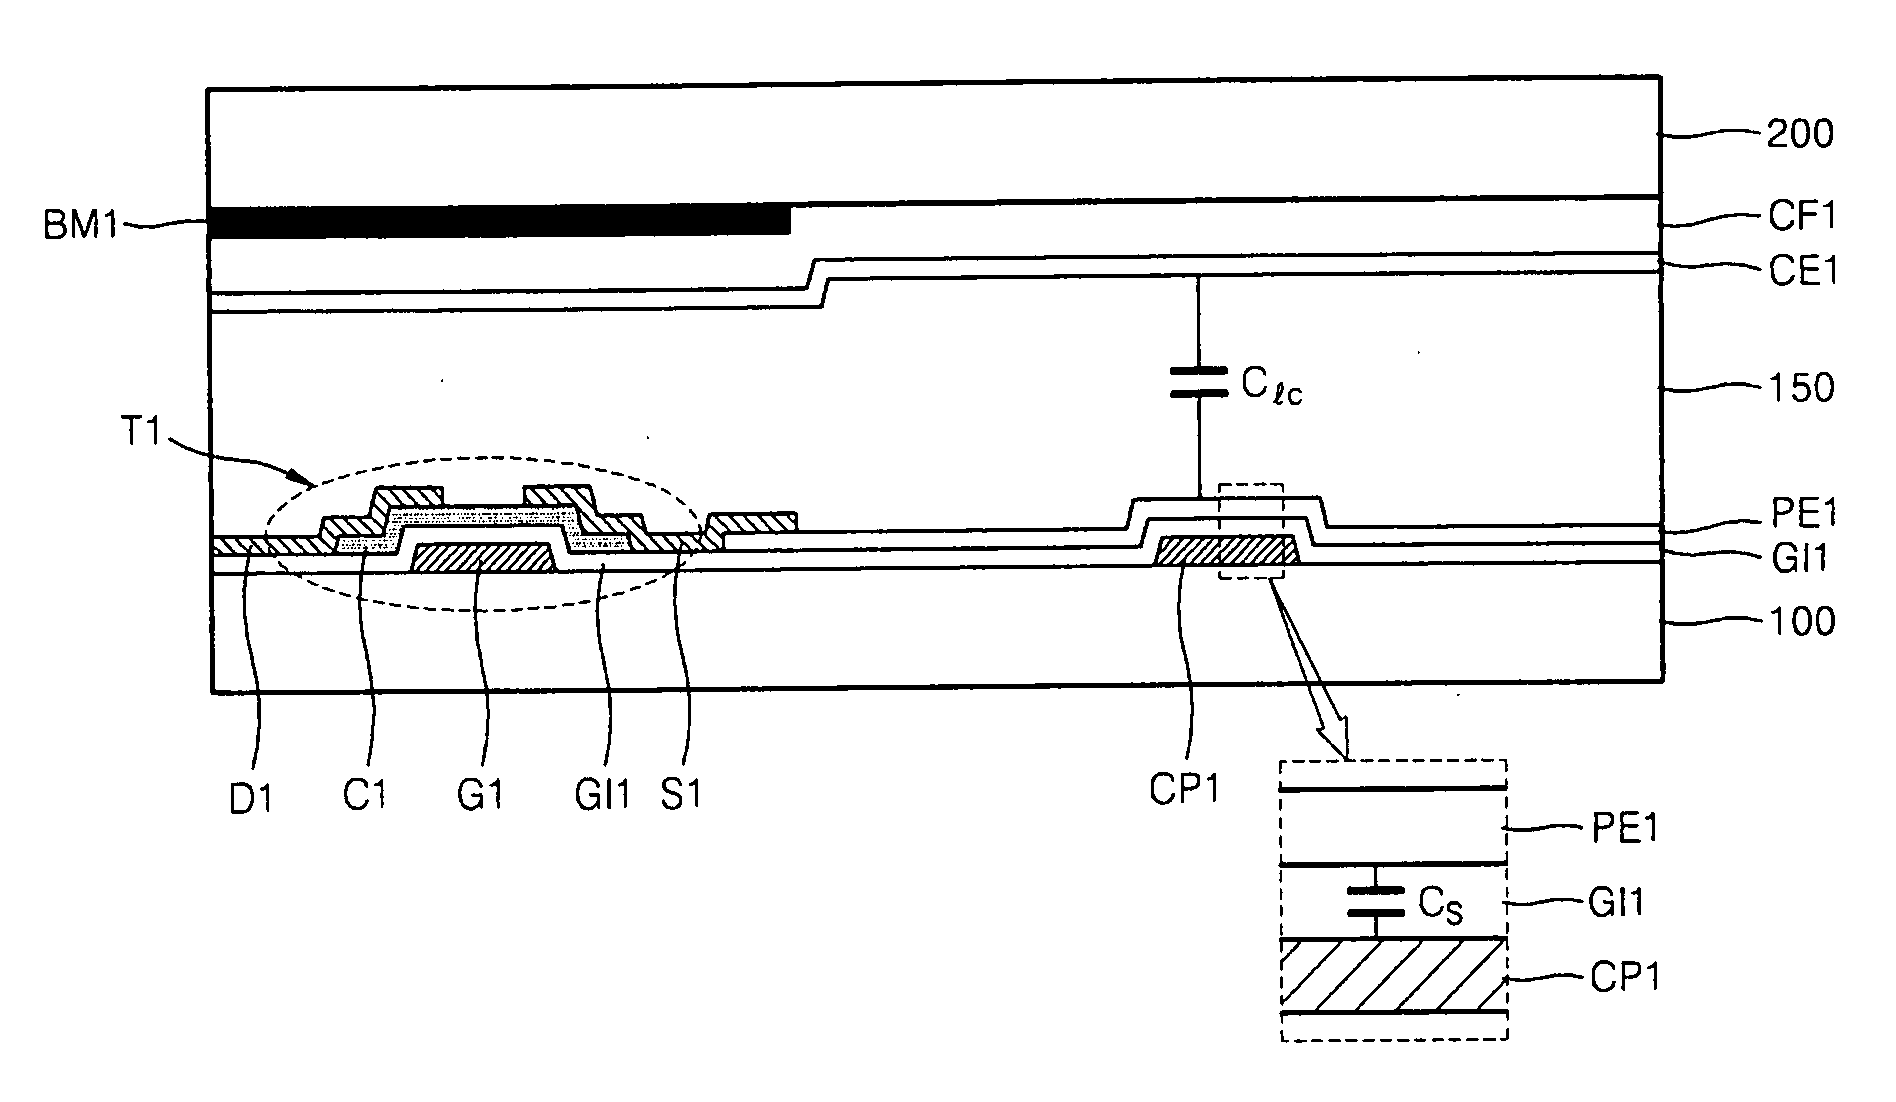 Display apparatuses and methods of operating the same